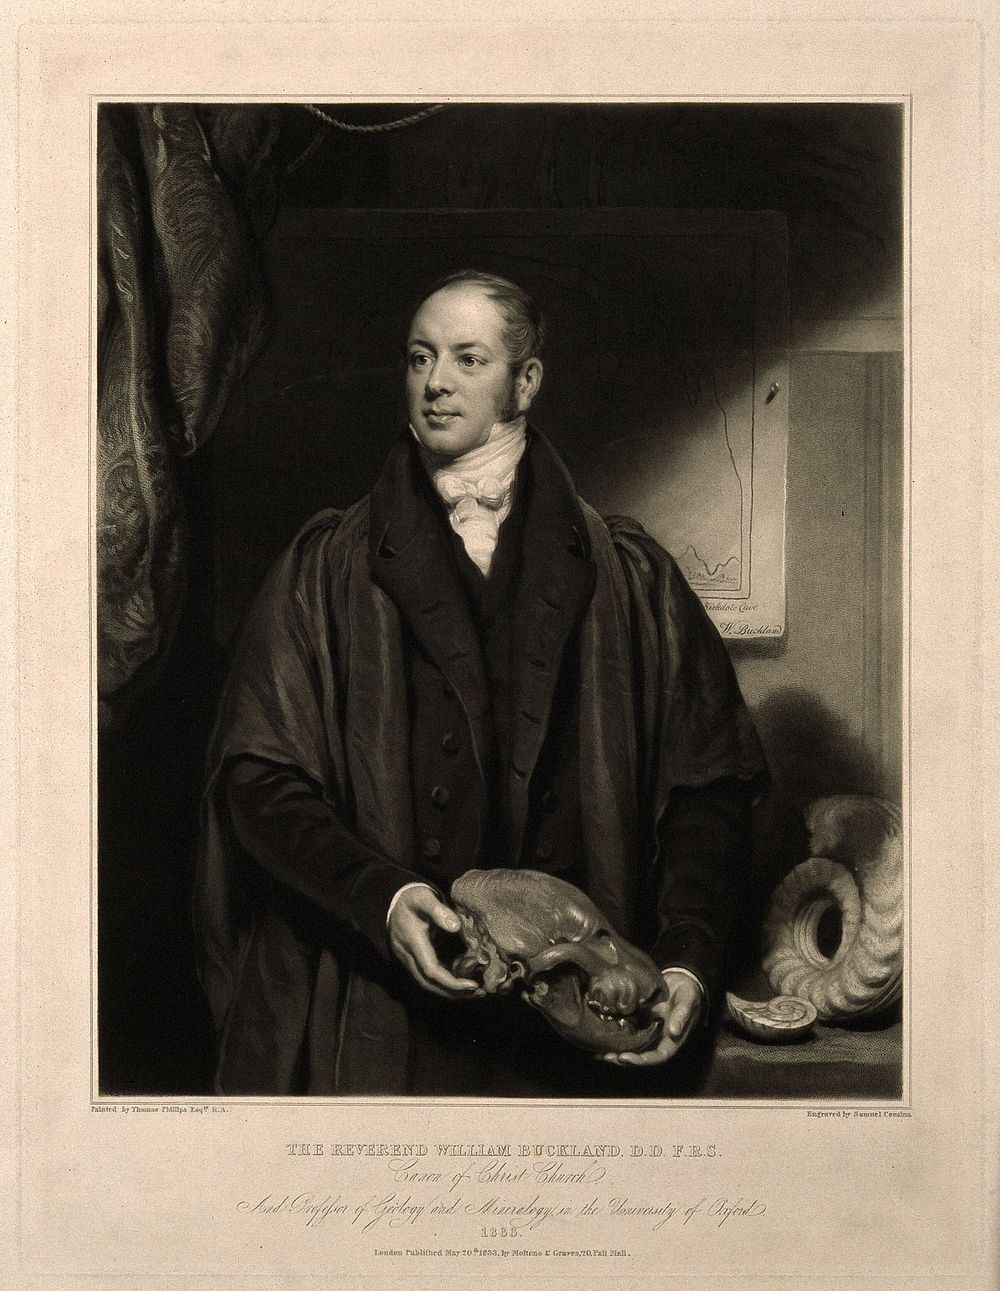 William Buckland. Mezzotint by S. Cousins, 1833, after T. Phillips.